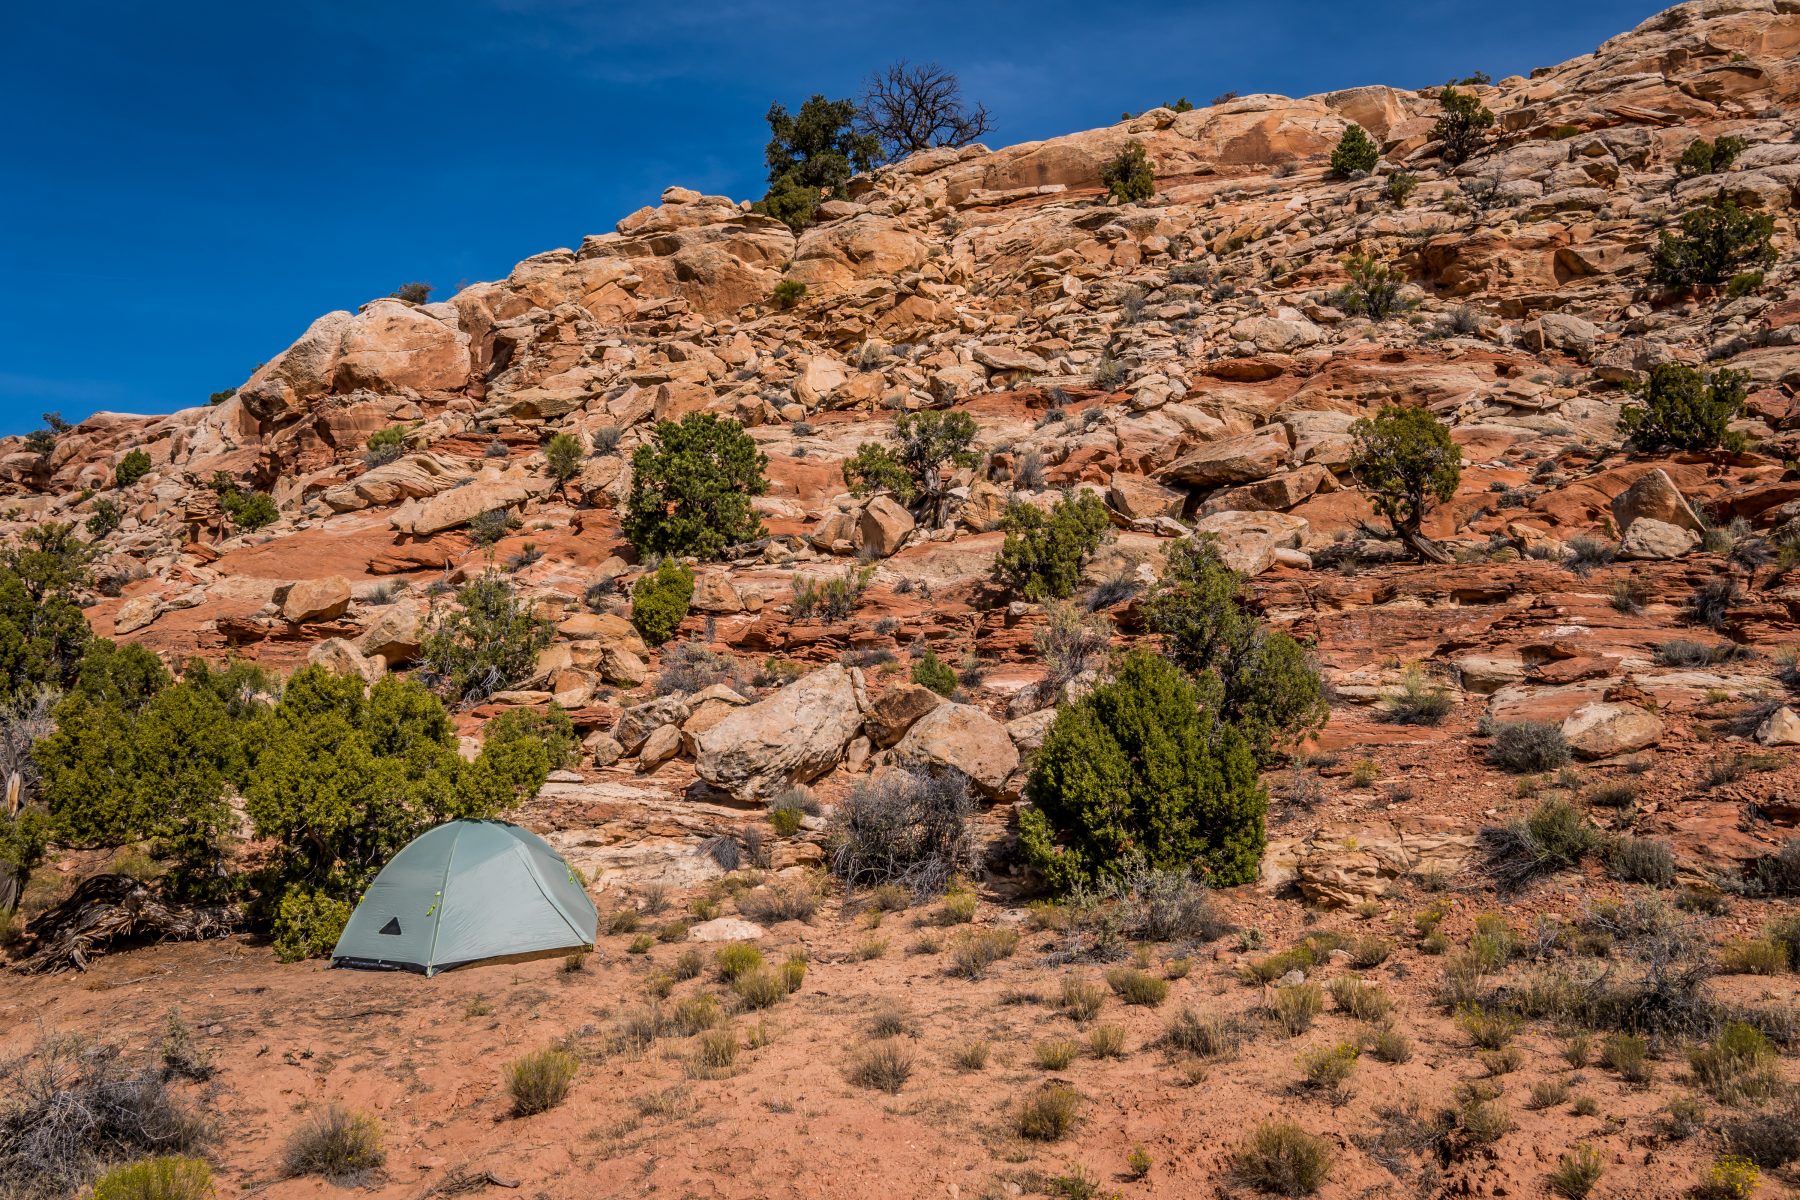 My beautiful campsite on BLM land just 20 feet outside of Arches National Park.